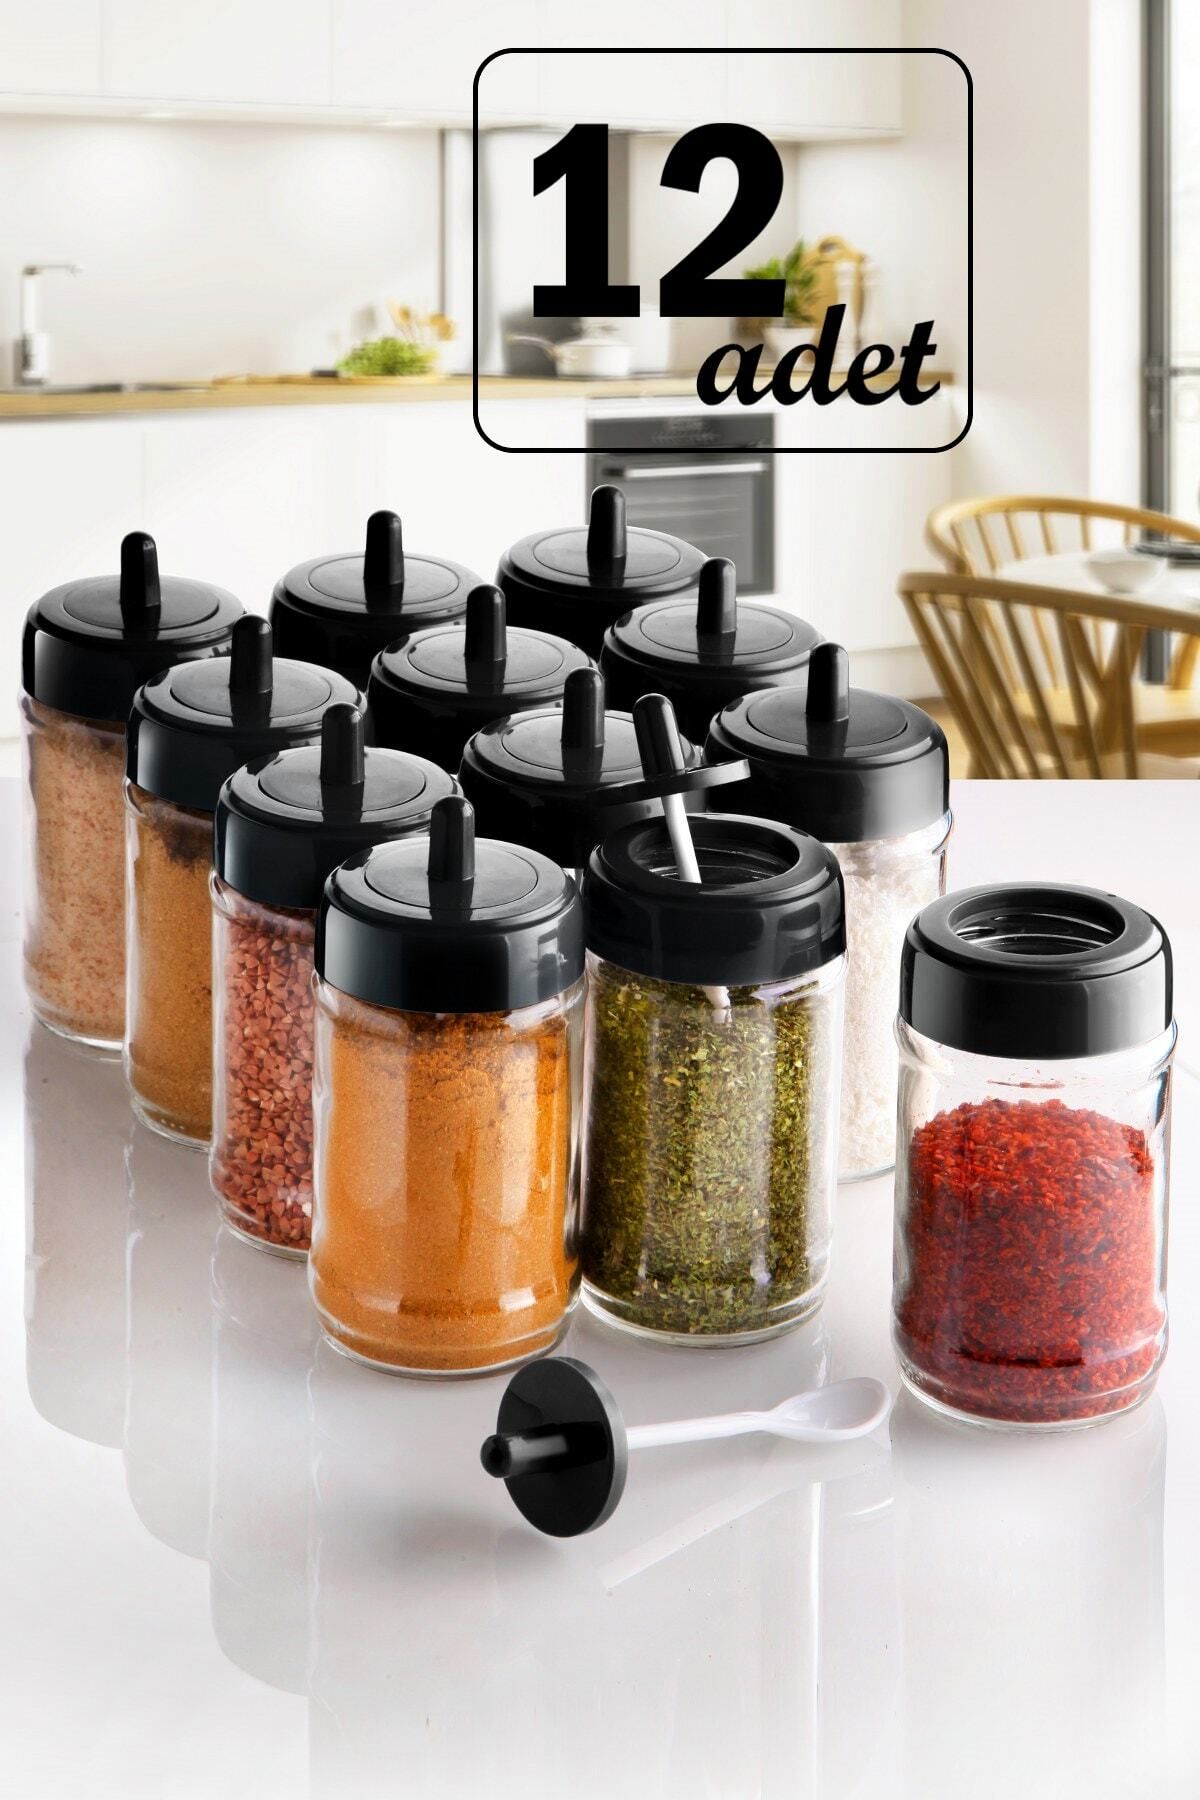 Tall Jars with Lids - 12 Pc.